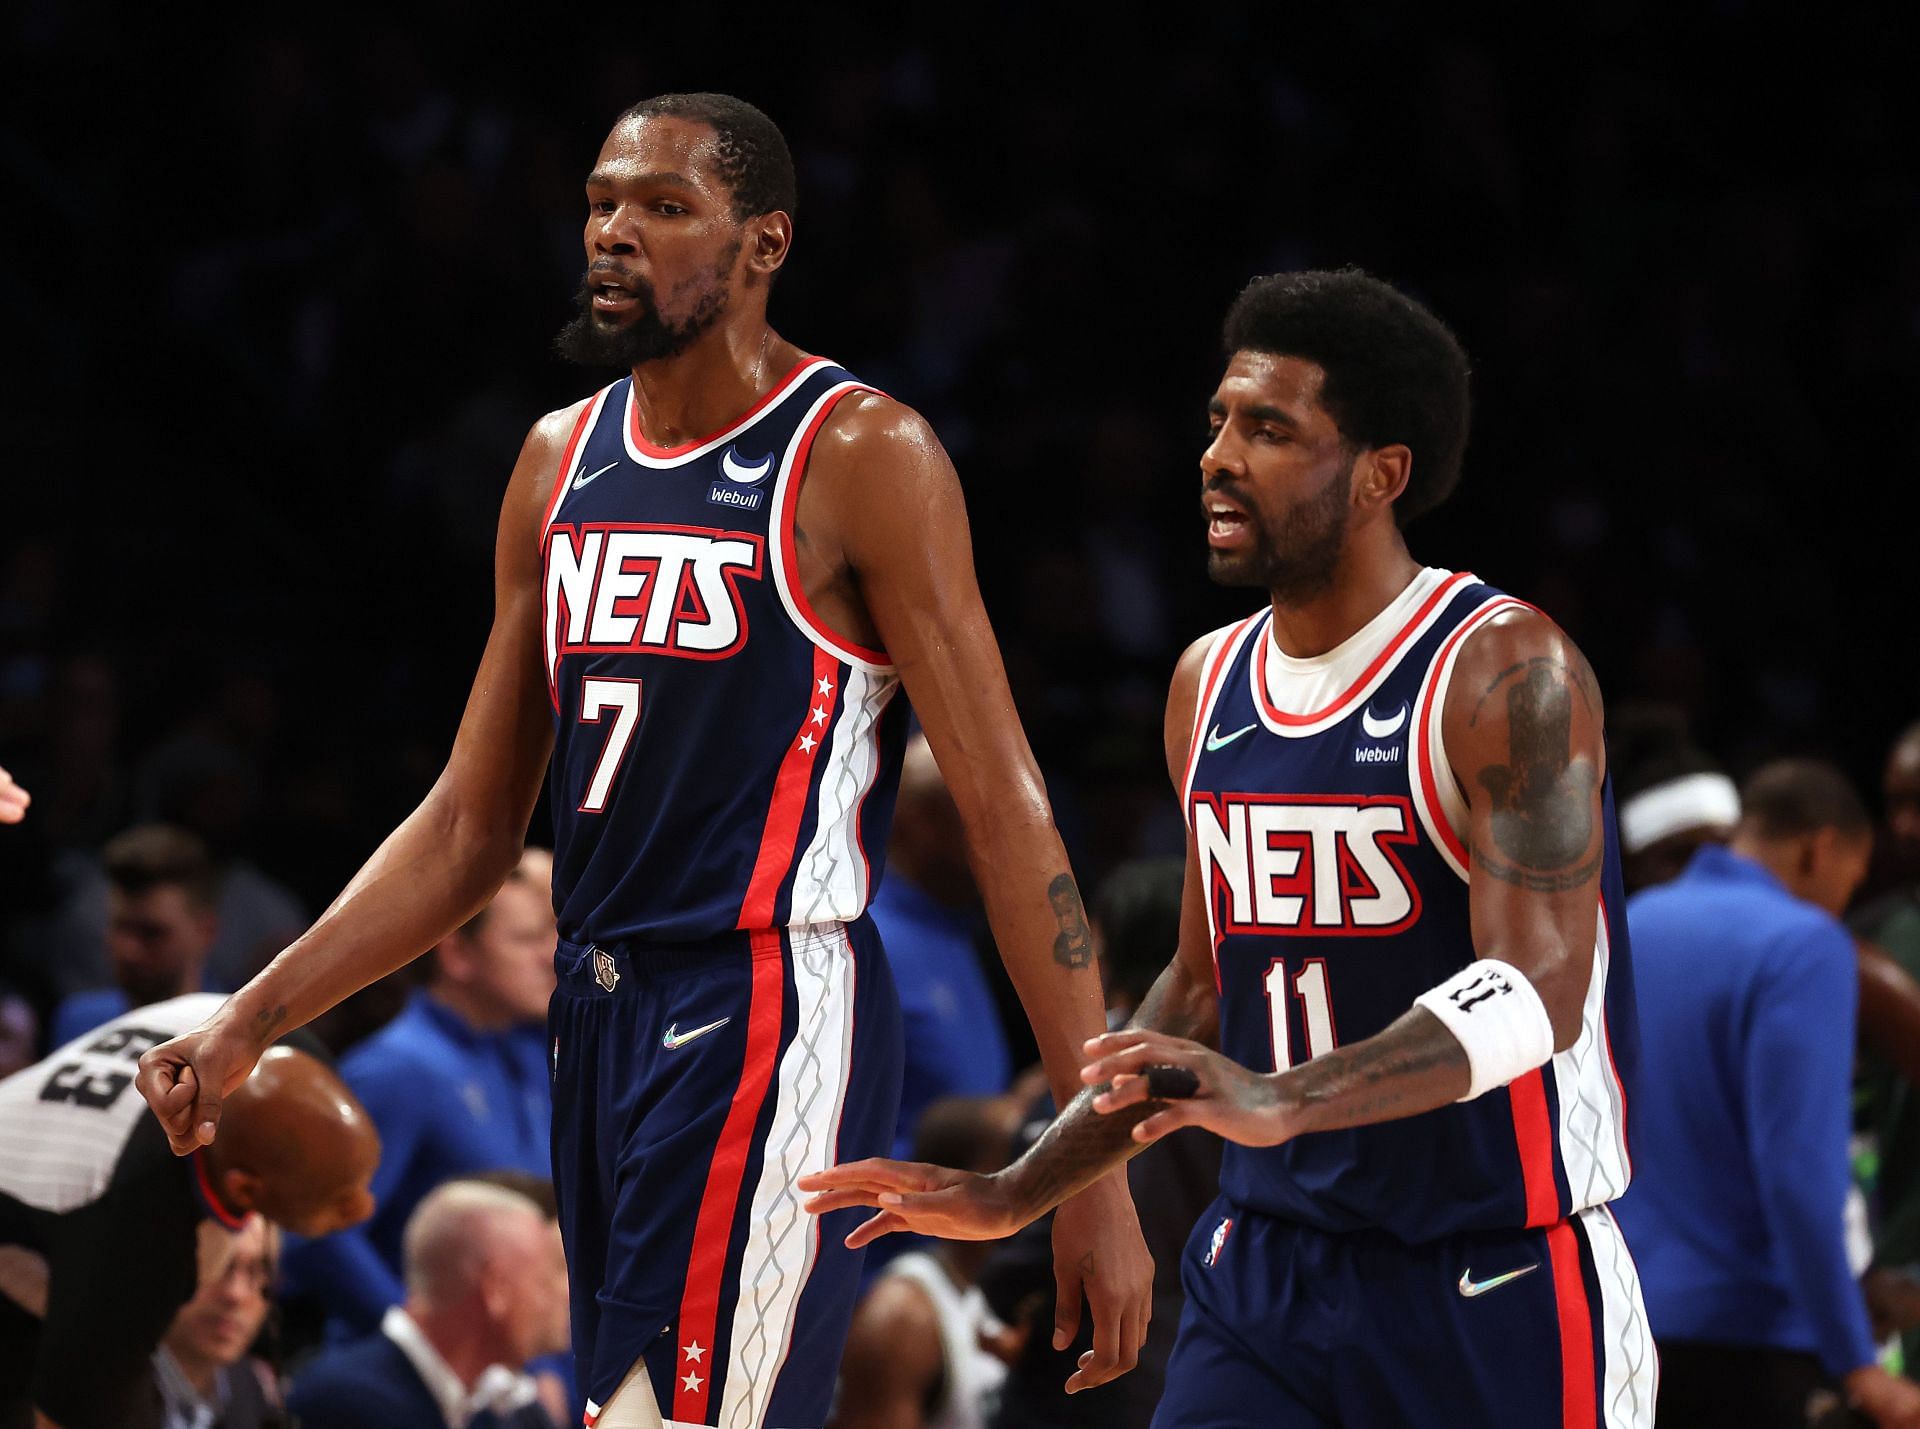 Kevin Durant #7 and Kyrie Irving #11 of the Brooklyn Nets